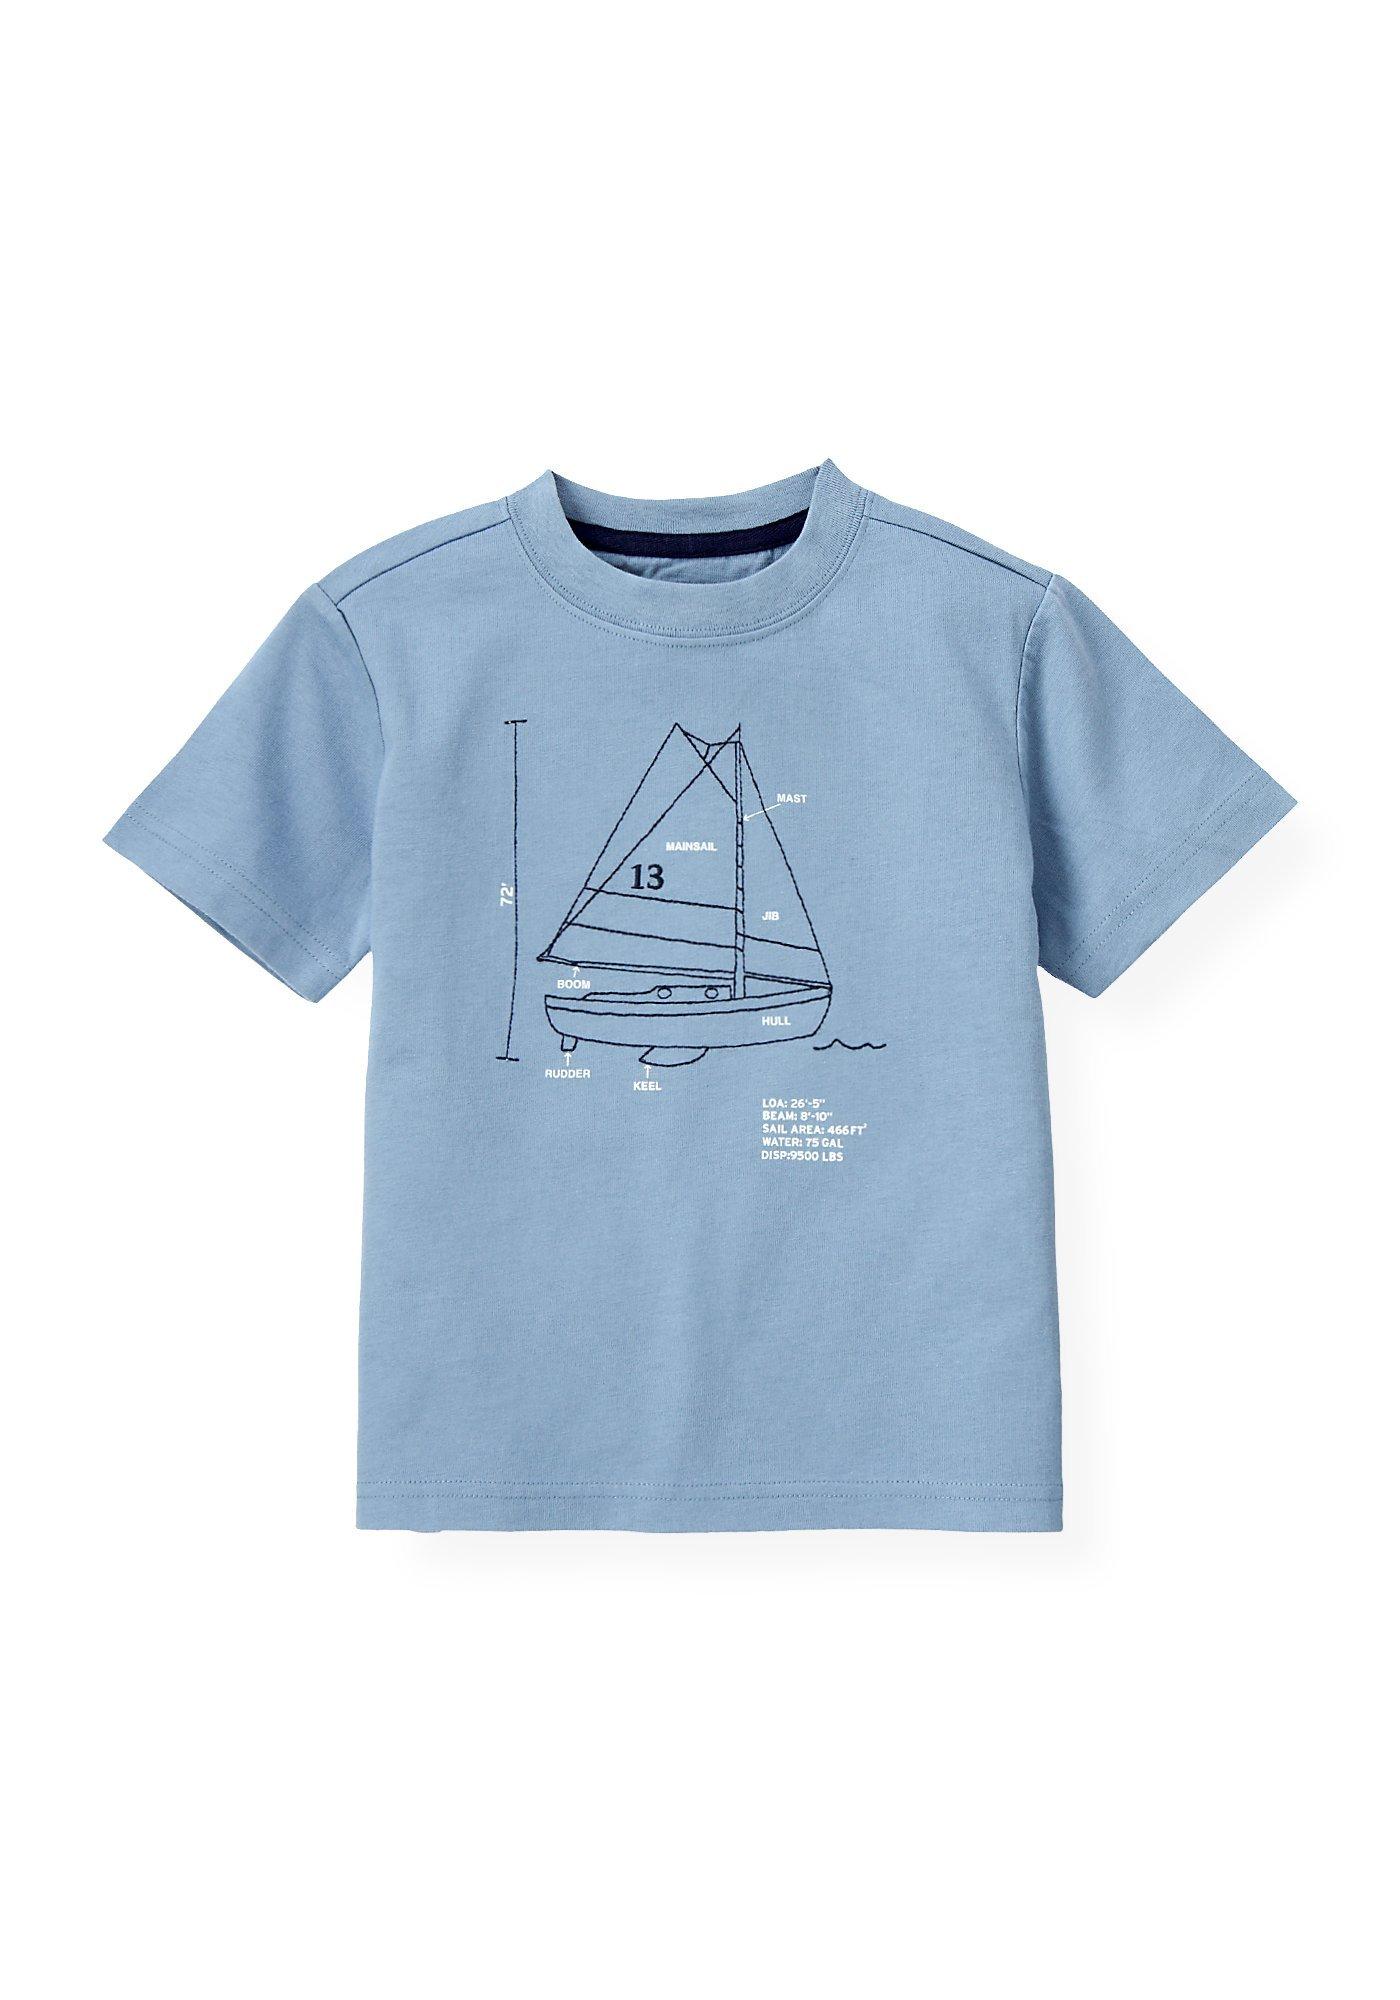 Embroidered Sailboat Tee image number 0